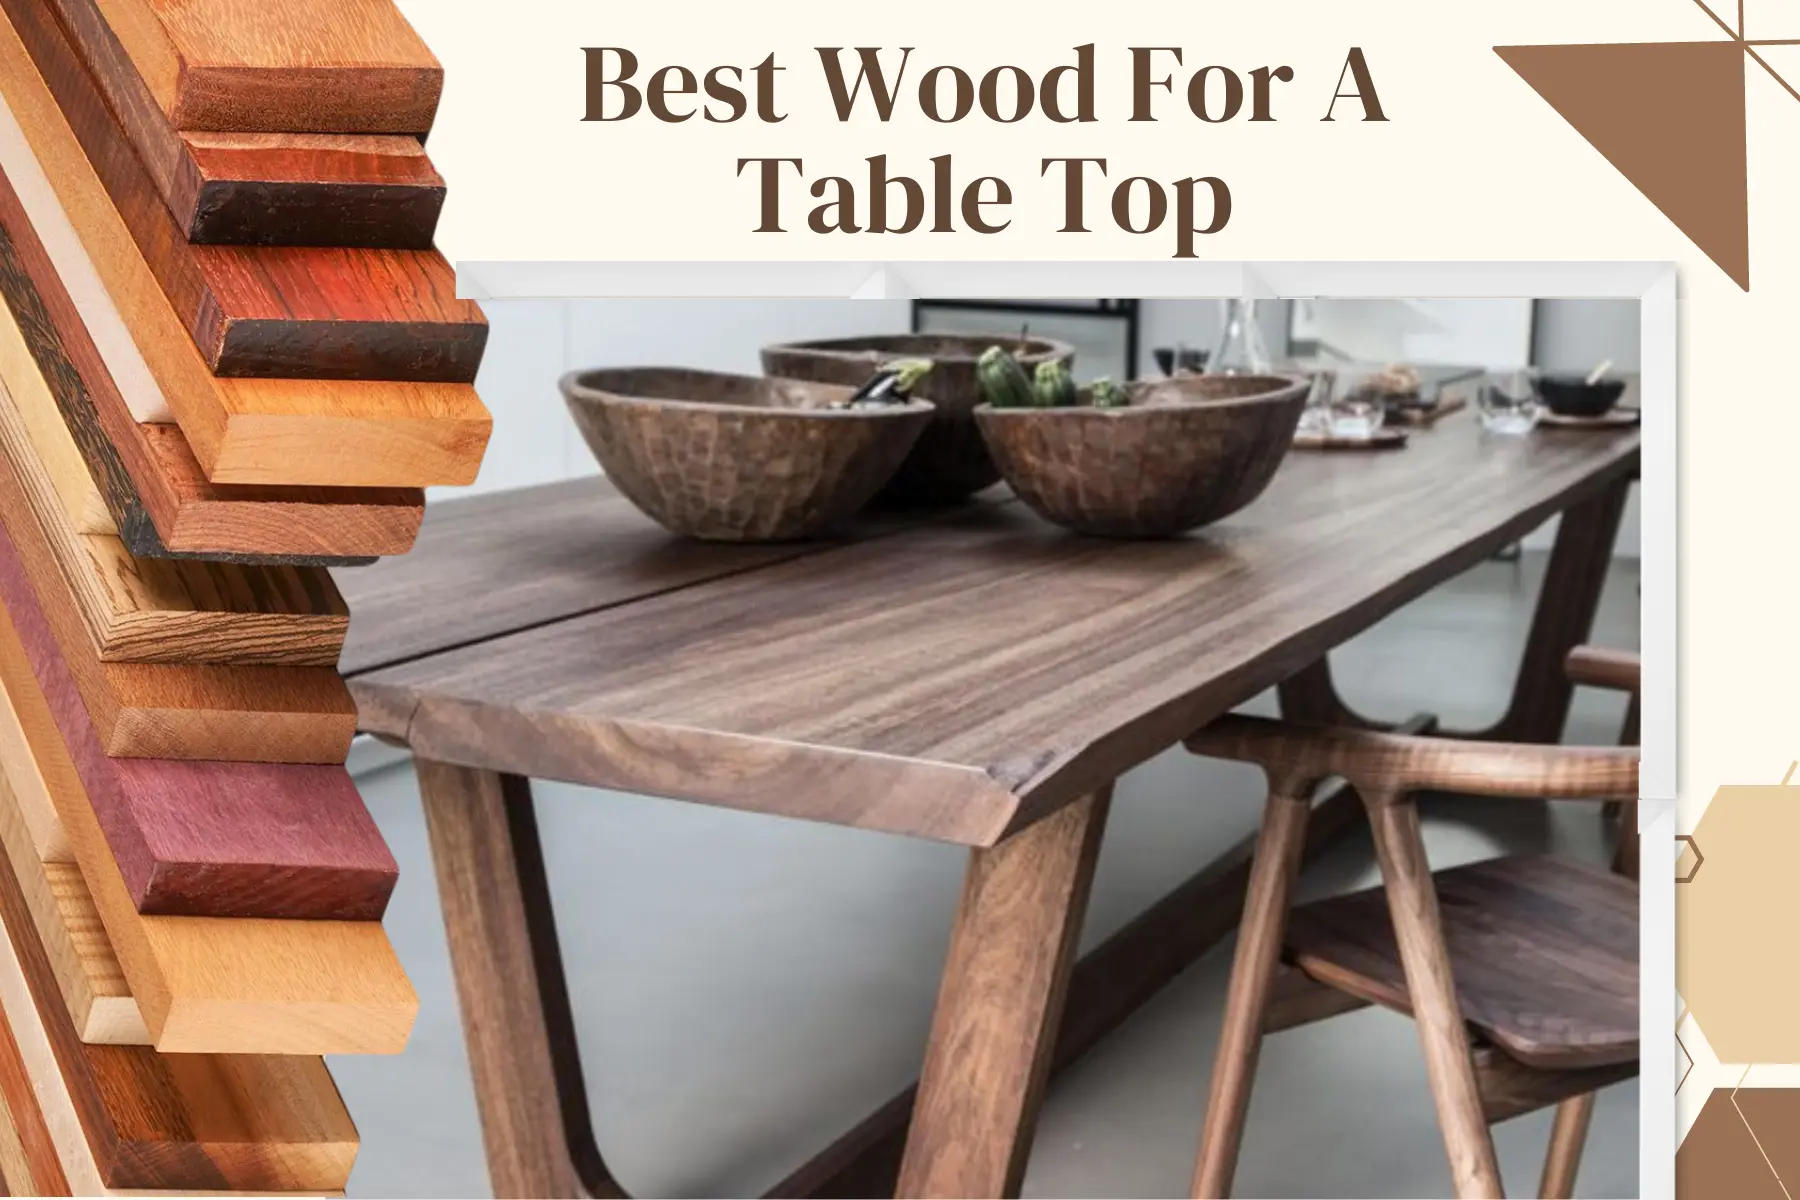 Best Wood Revealed: Top Choices for Crafting Your Table Top